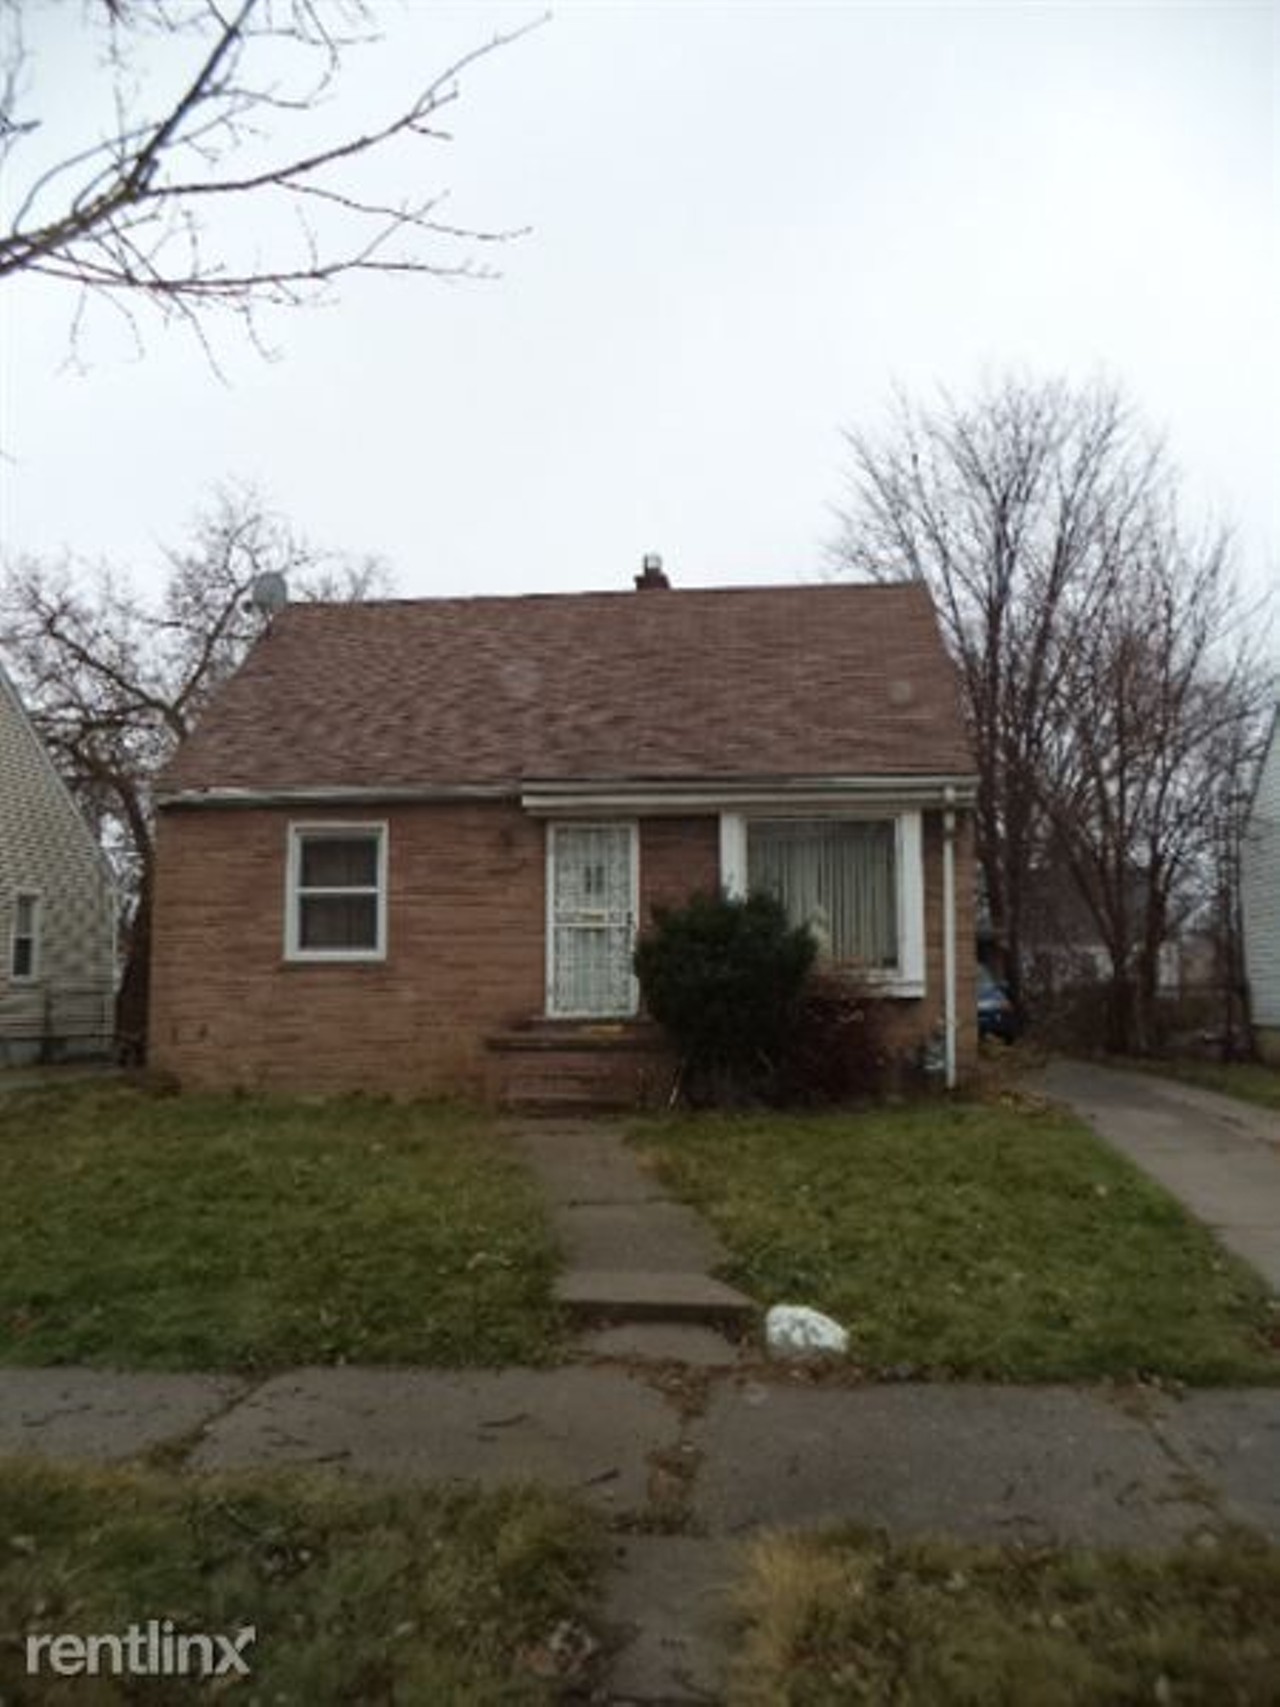 Hamtramck | $700/month | 3 bed, 1 bath 
17851 Wexford St.
A whole house for $700/month, what a steal! It also has a washer/dryer, hardwood floors, finished basement, and ceramic tiles in the bathroom. The best part? There&#146;s a two door garage, too. Why aren&#146;t you living here yet?